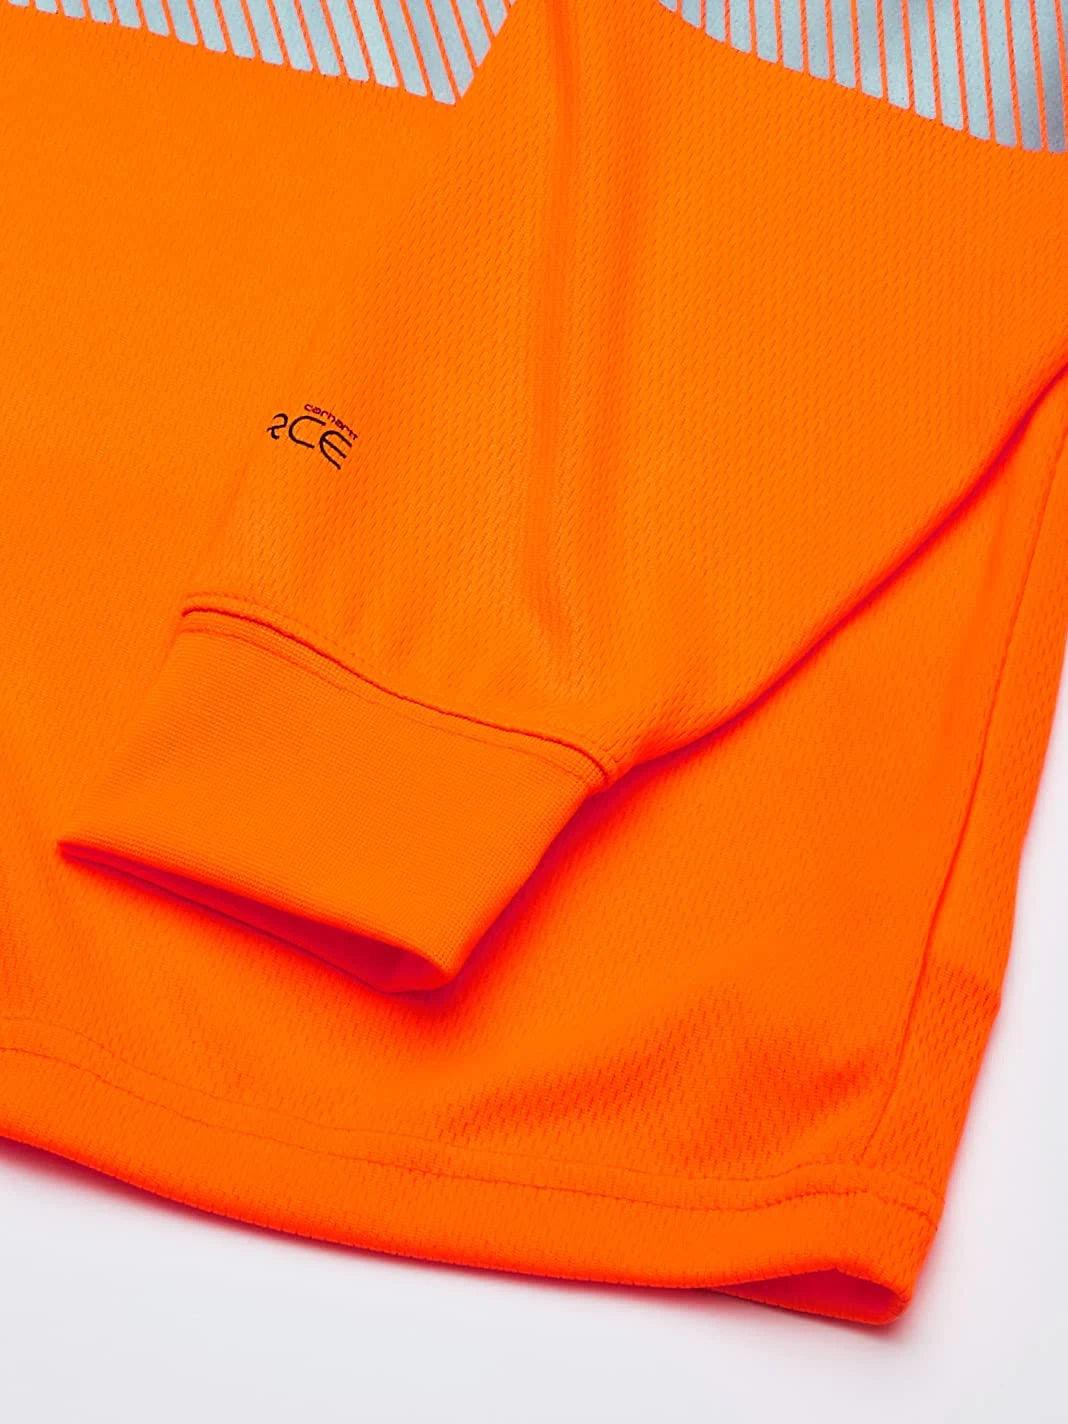 Class 3 High Visibility Force Long Sleeve T-Shirt - Brite Orange - Purpose-Built / Home of the Trades